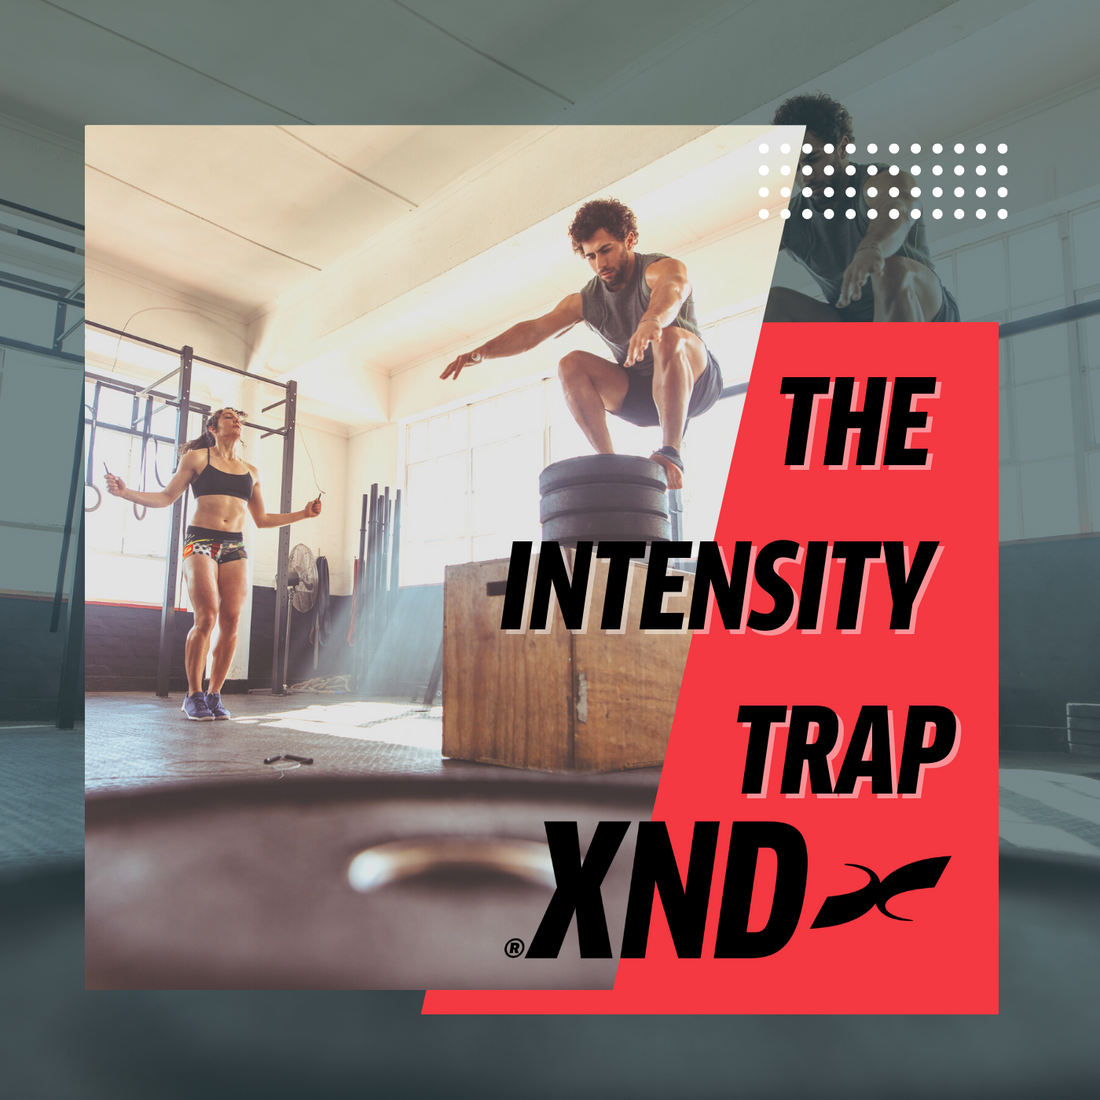 The intensity trap